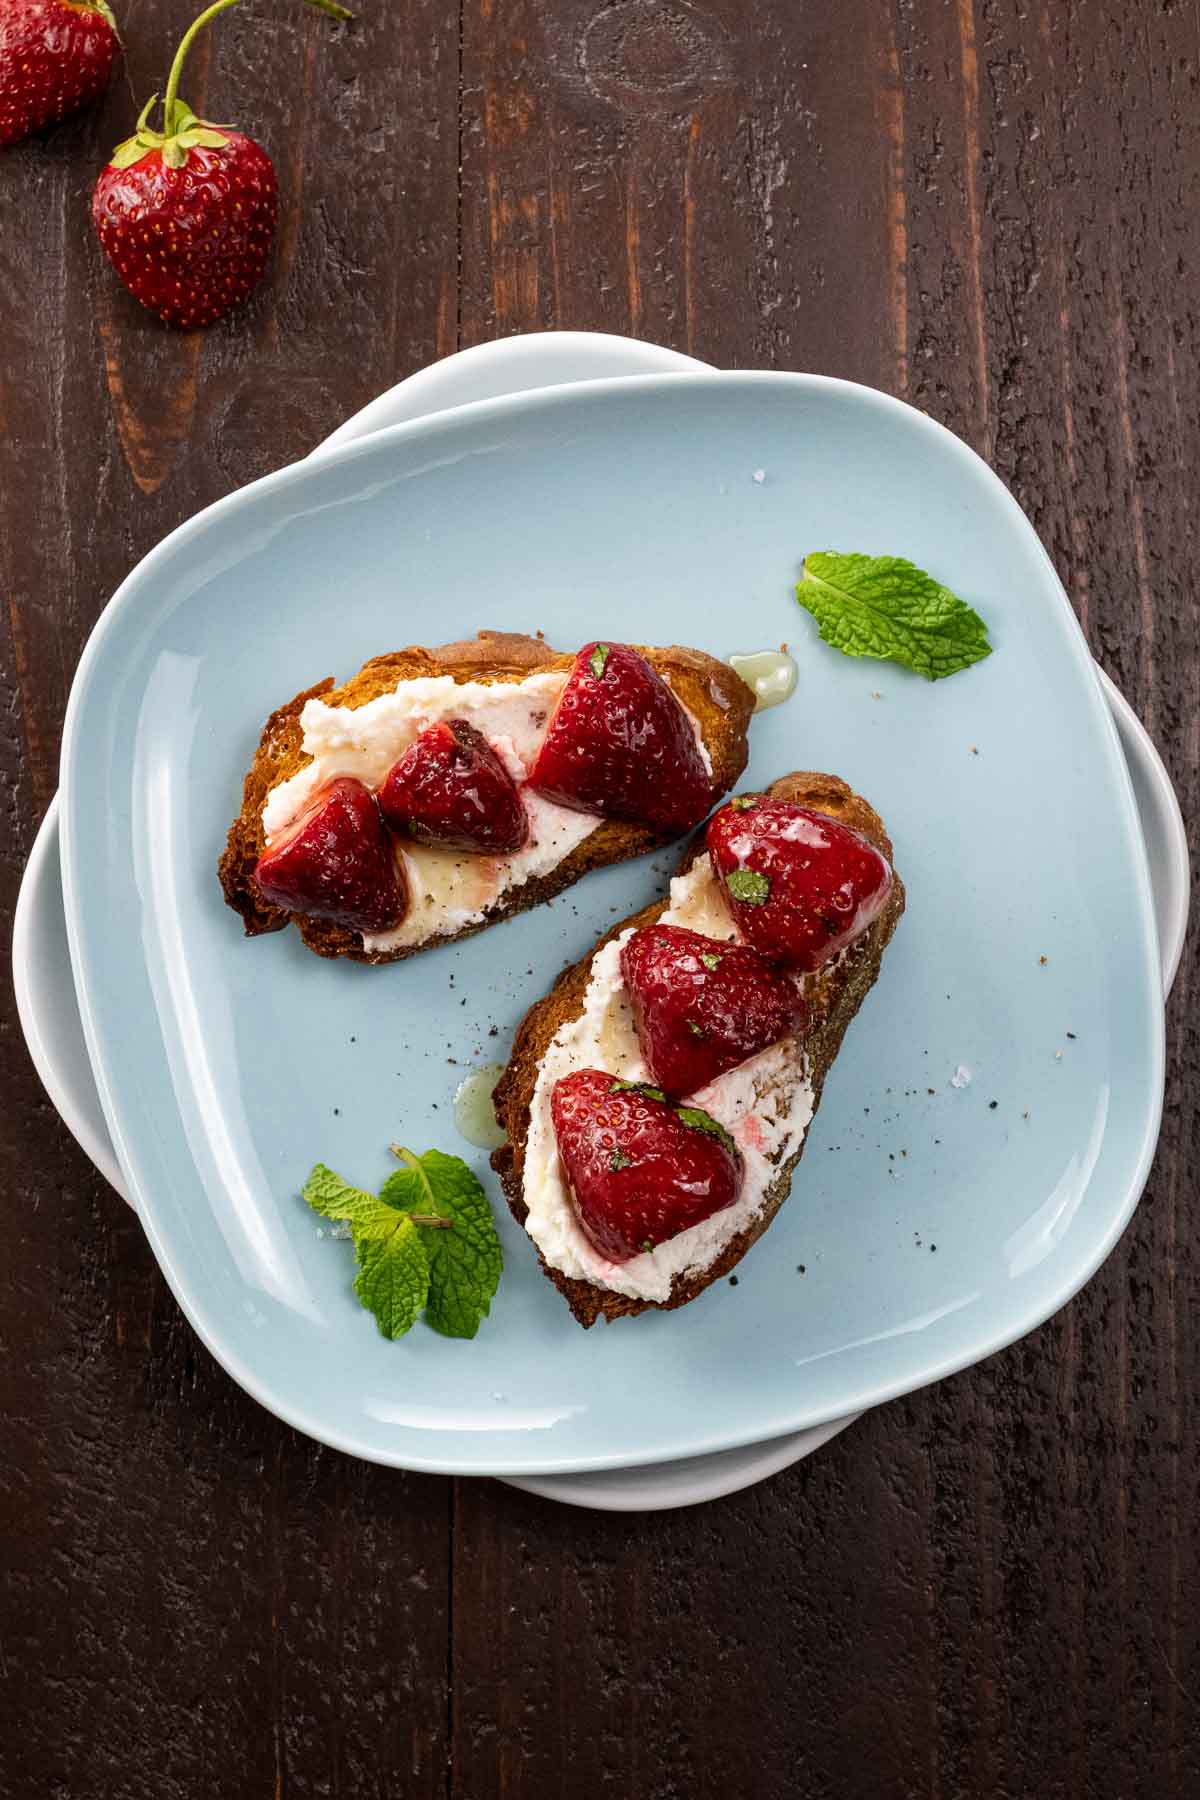 The goat cheese bruschetta slices on a blue plate, another unique strawberry recipes